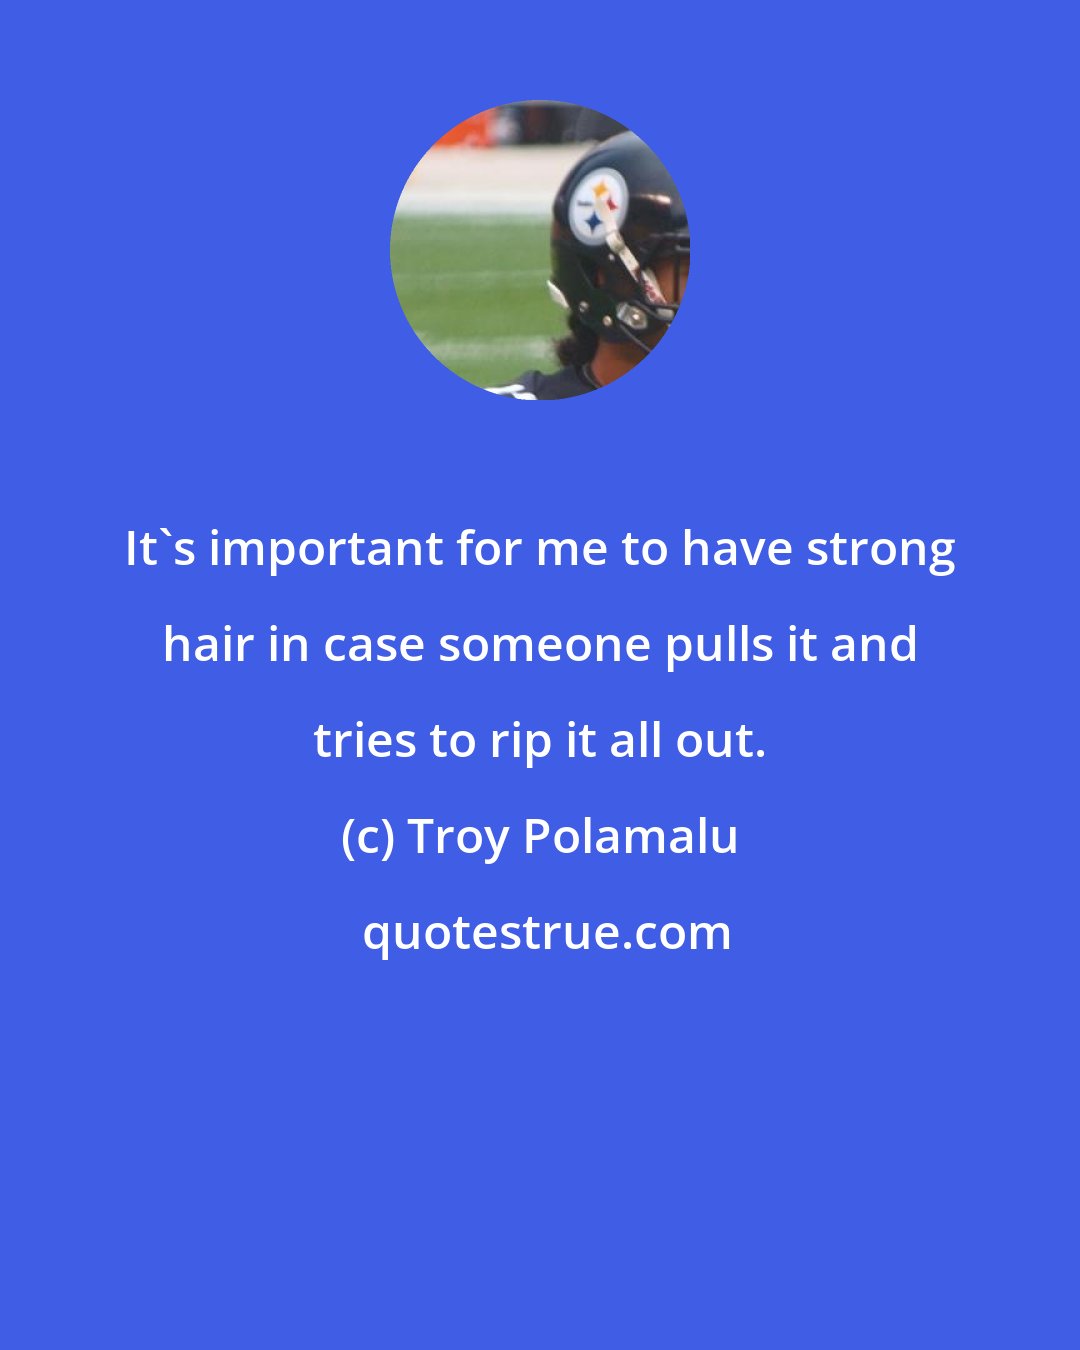 Troy Polamalu: It's important for me to have strong hair in case someone pulls it and tries to rip it all out.